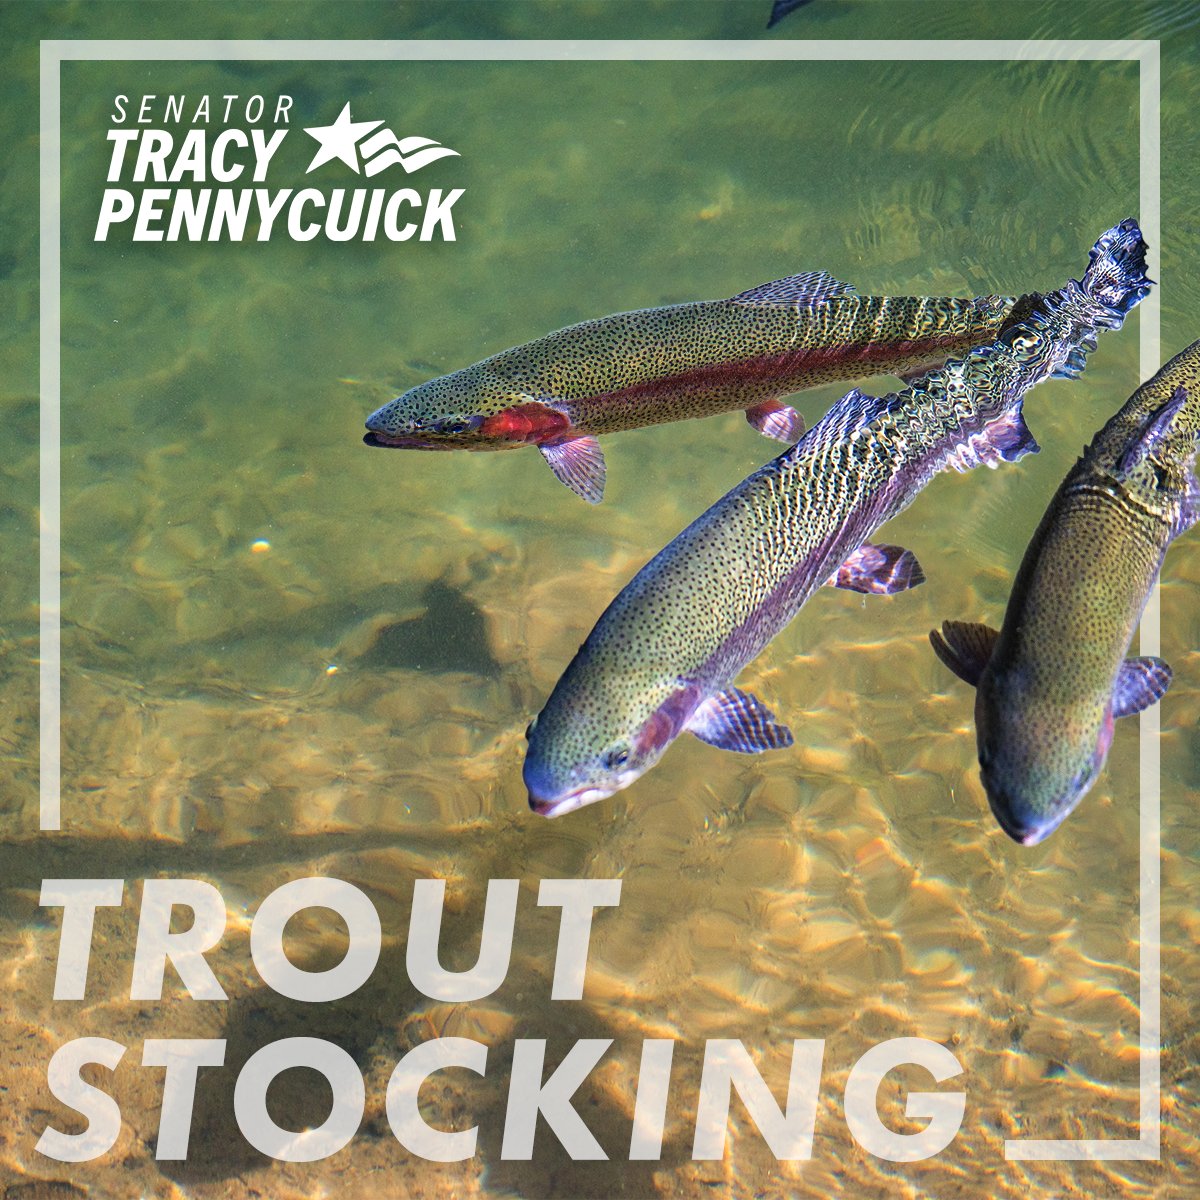 PA waterways are being restocked by @pafishandboat with 117,500 adult rainbow, brown and brook trout. 🎣

Find your local stocking schedule here: bit.ly/3F3Mcyo 

#SD24 #SenatorPennycuick #TroutStocking #pafishing